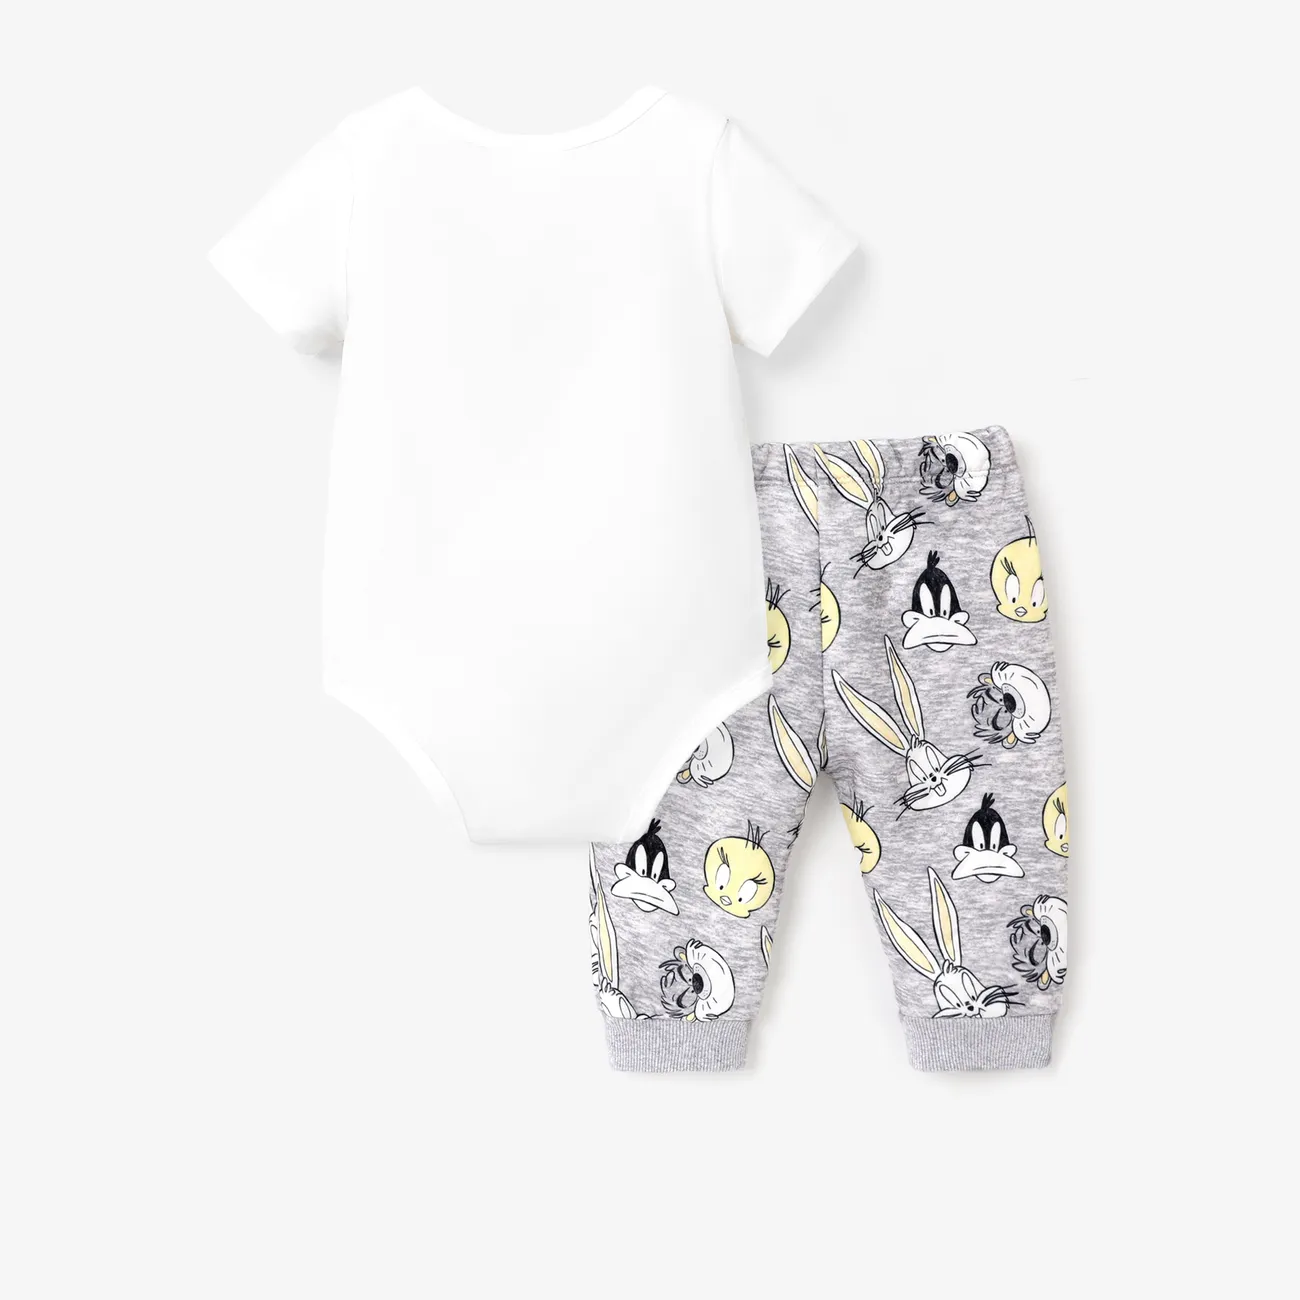 Looney Tunes Baby Boy/Girl Quilted Character Avatar Pattern Jacket or Romper Set White big image 1